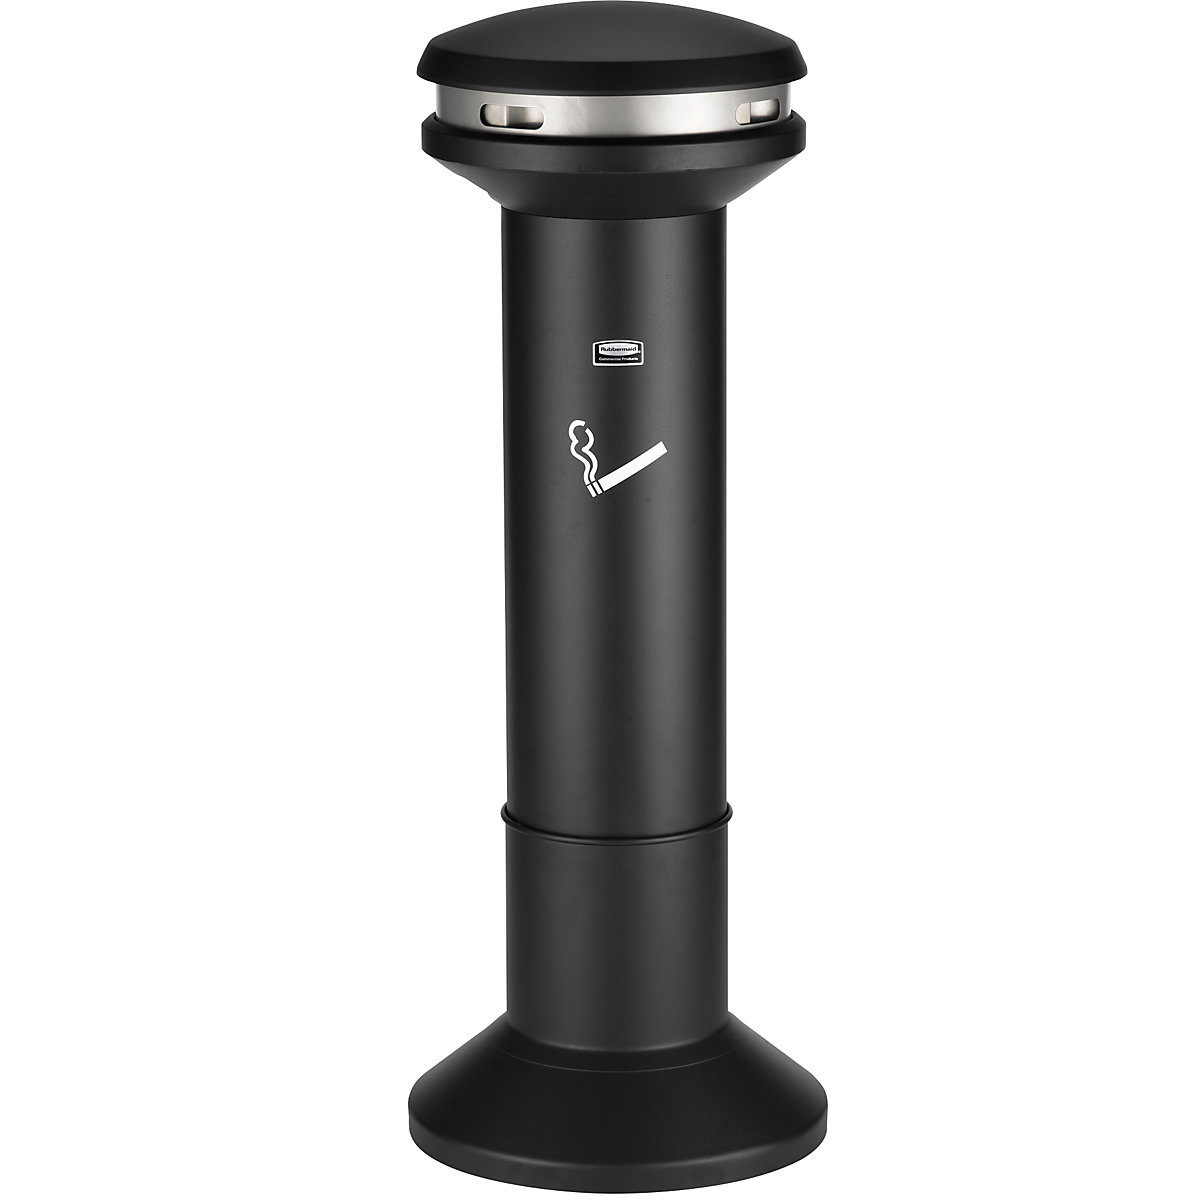 Rubbermaid – Pedestal ashtray made of zinc plated steel, height 1010 mm, Ø 400 mm, black